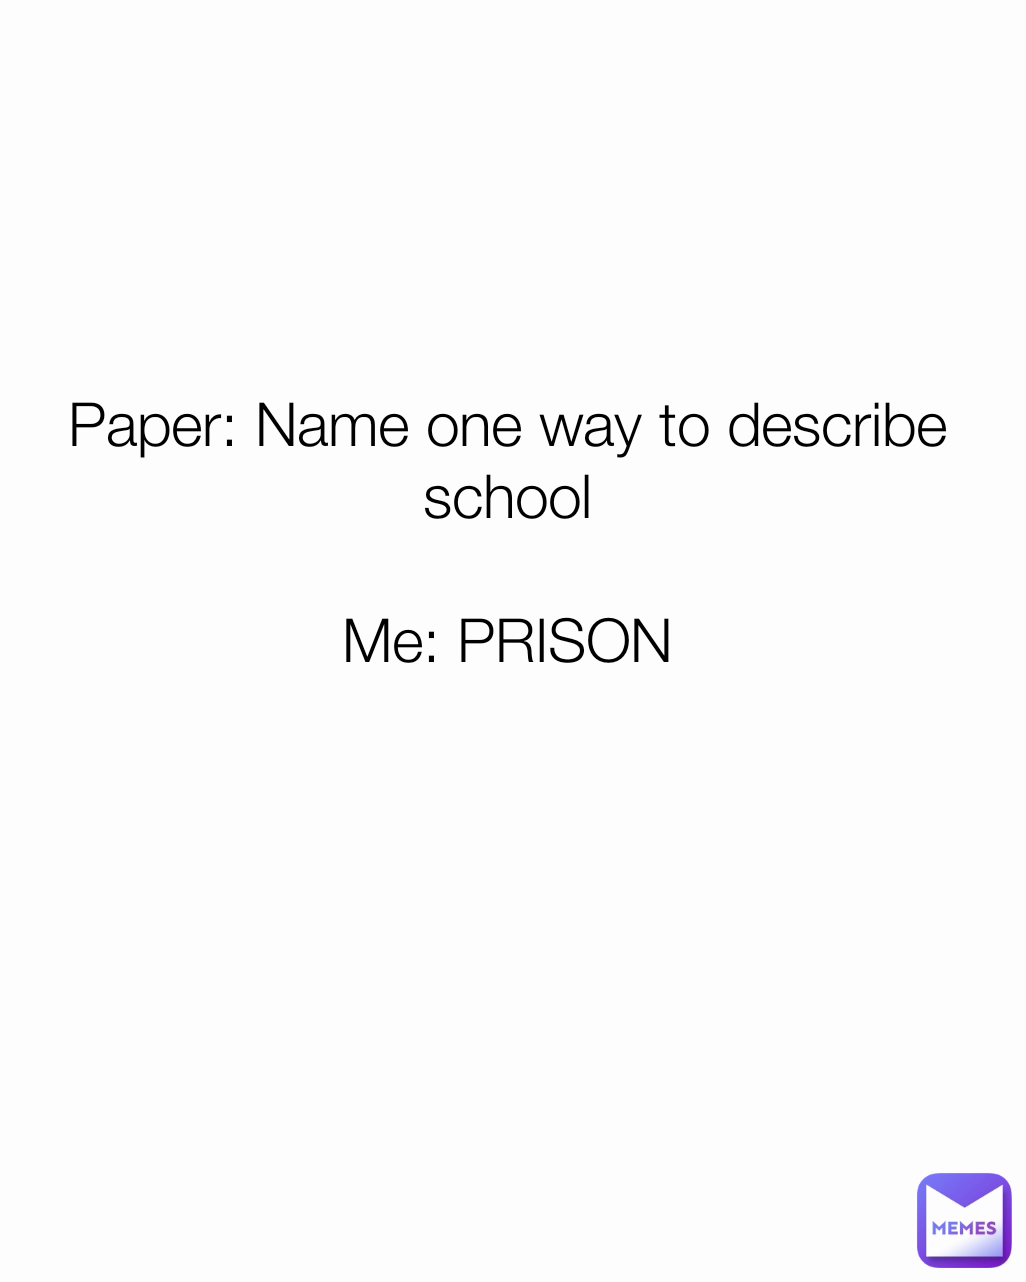 Paper: Name one way to describe school

Me: PRISON